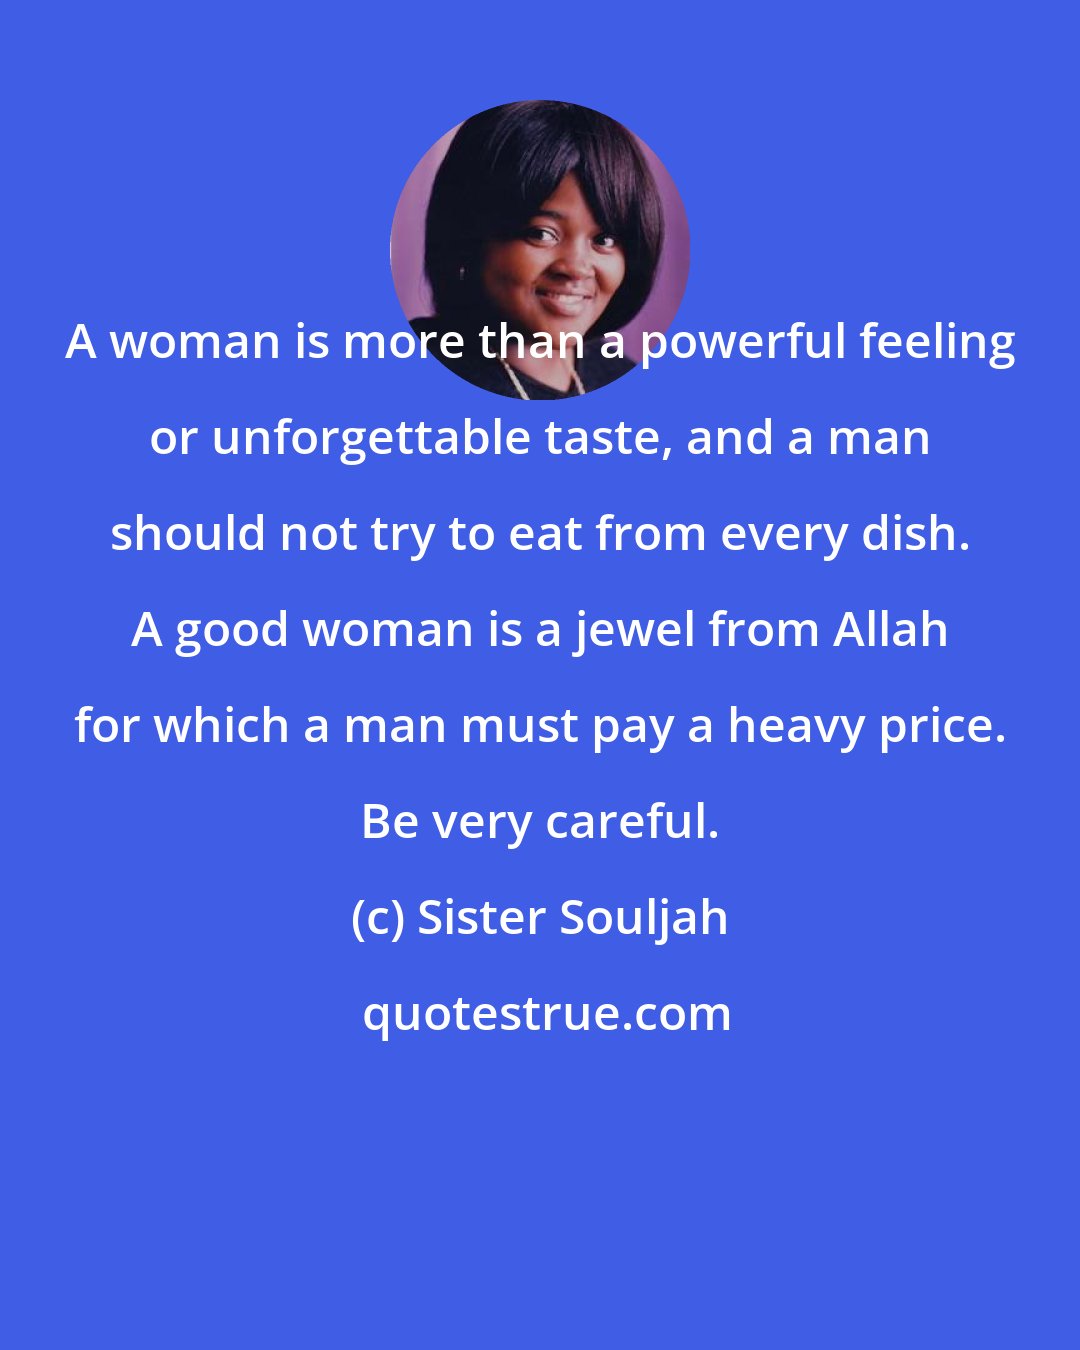 Sister Souljah: A woman is more than a powerful feeling or unforgettable taste, and a man should not try to eat from every dish. A good woman is a jewel from Allah for which a man must pay a heavy price. Be very careful.